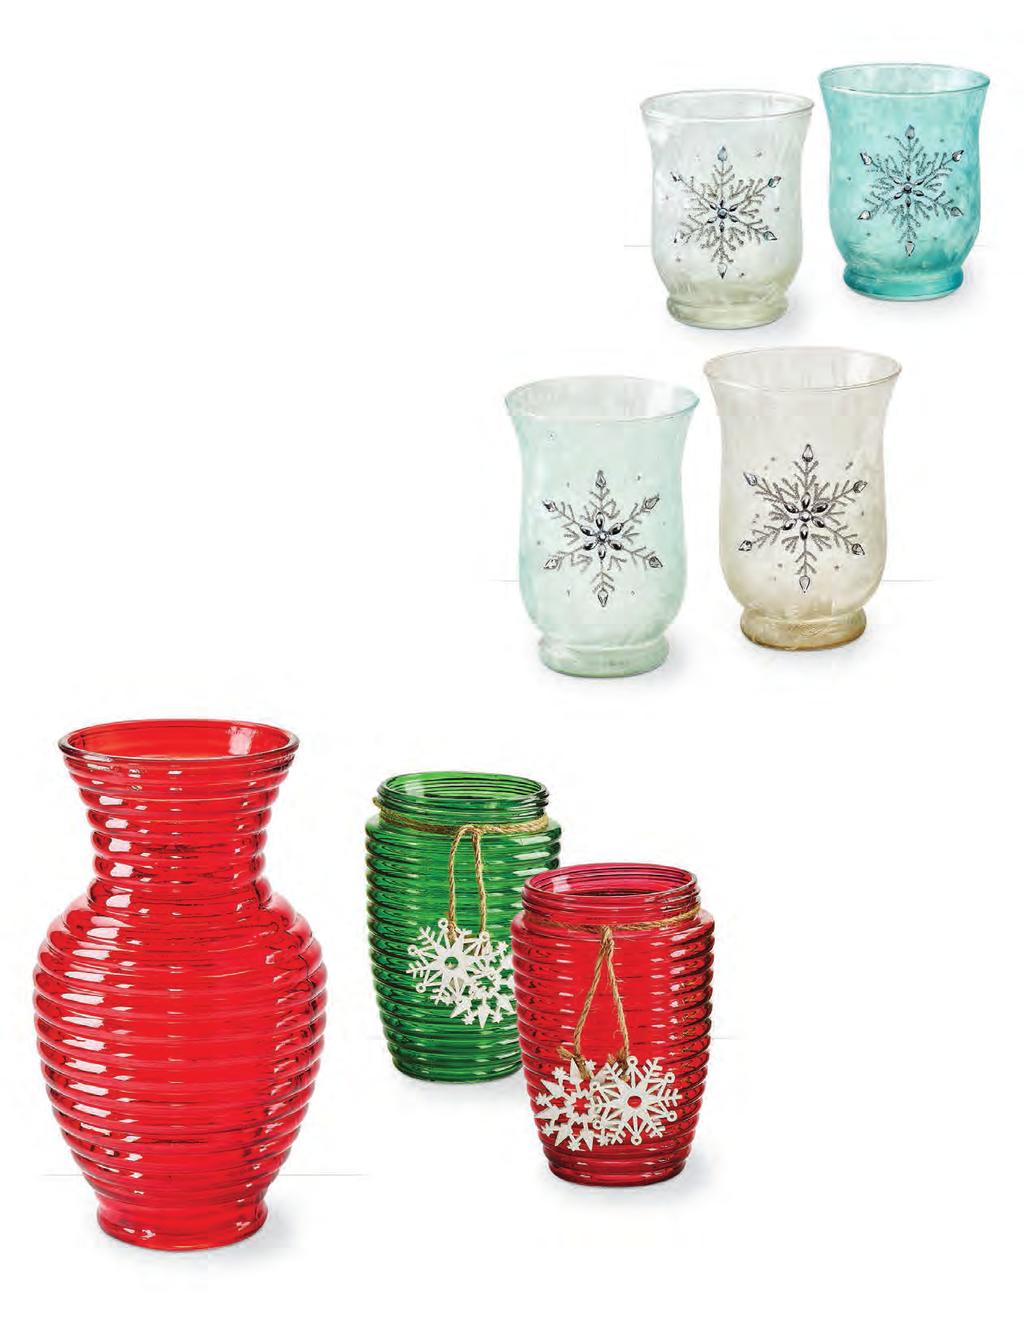 GV11-SNOW Two Assorted Frosted Glass Vase 3.5 opening x 4.5 tall 16/$3.99 ea.